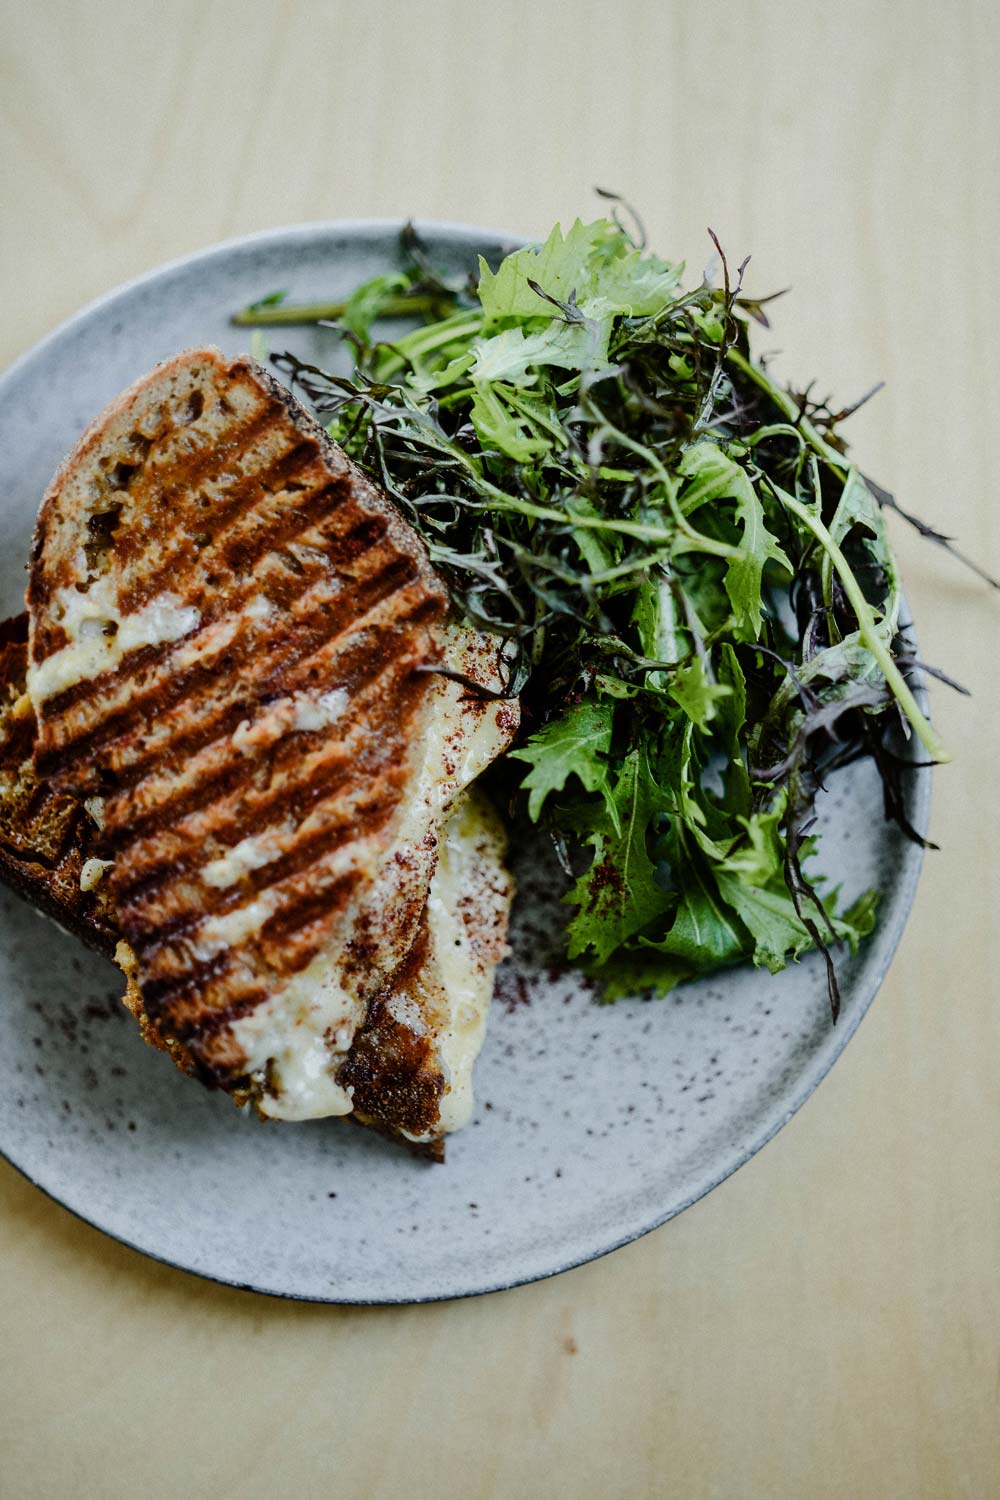 A grilled cheese and salad at Temple cafe